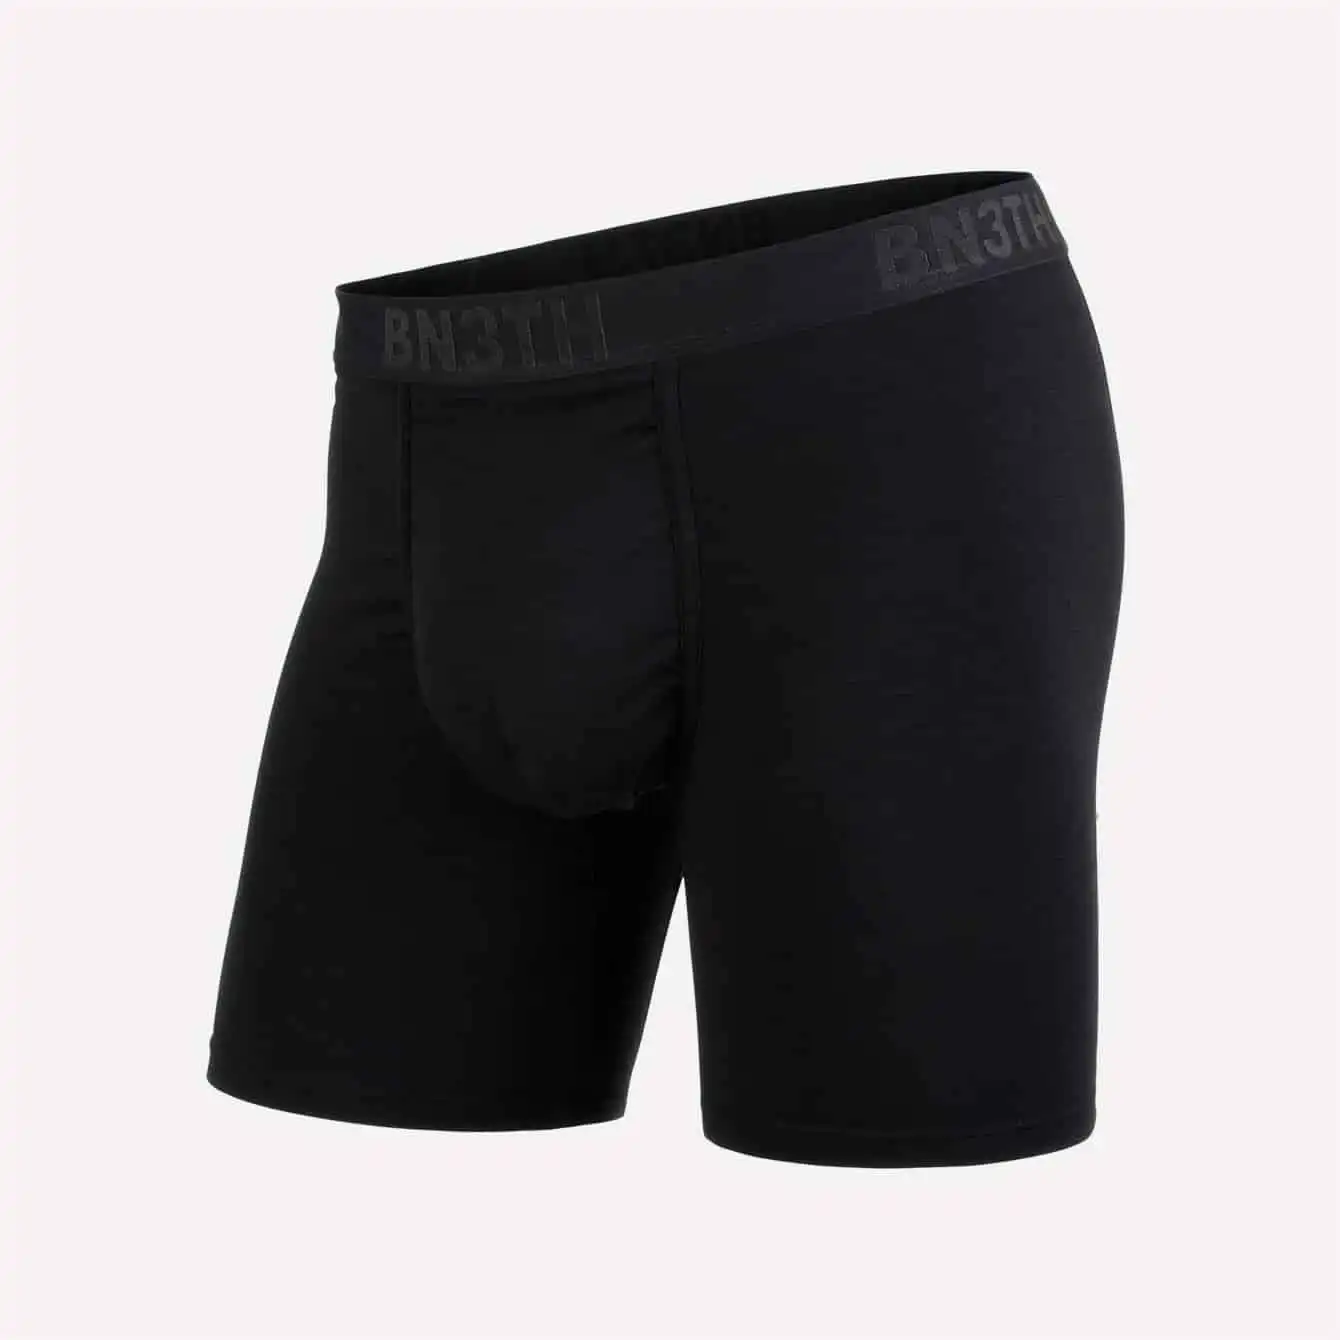 BN3TH Boxer Mushroom Black  Breathable, Lightweight, 3D Pouch